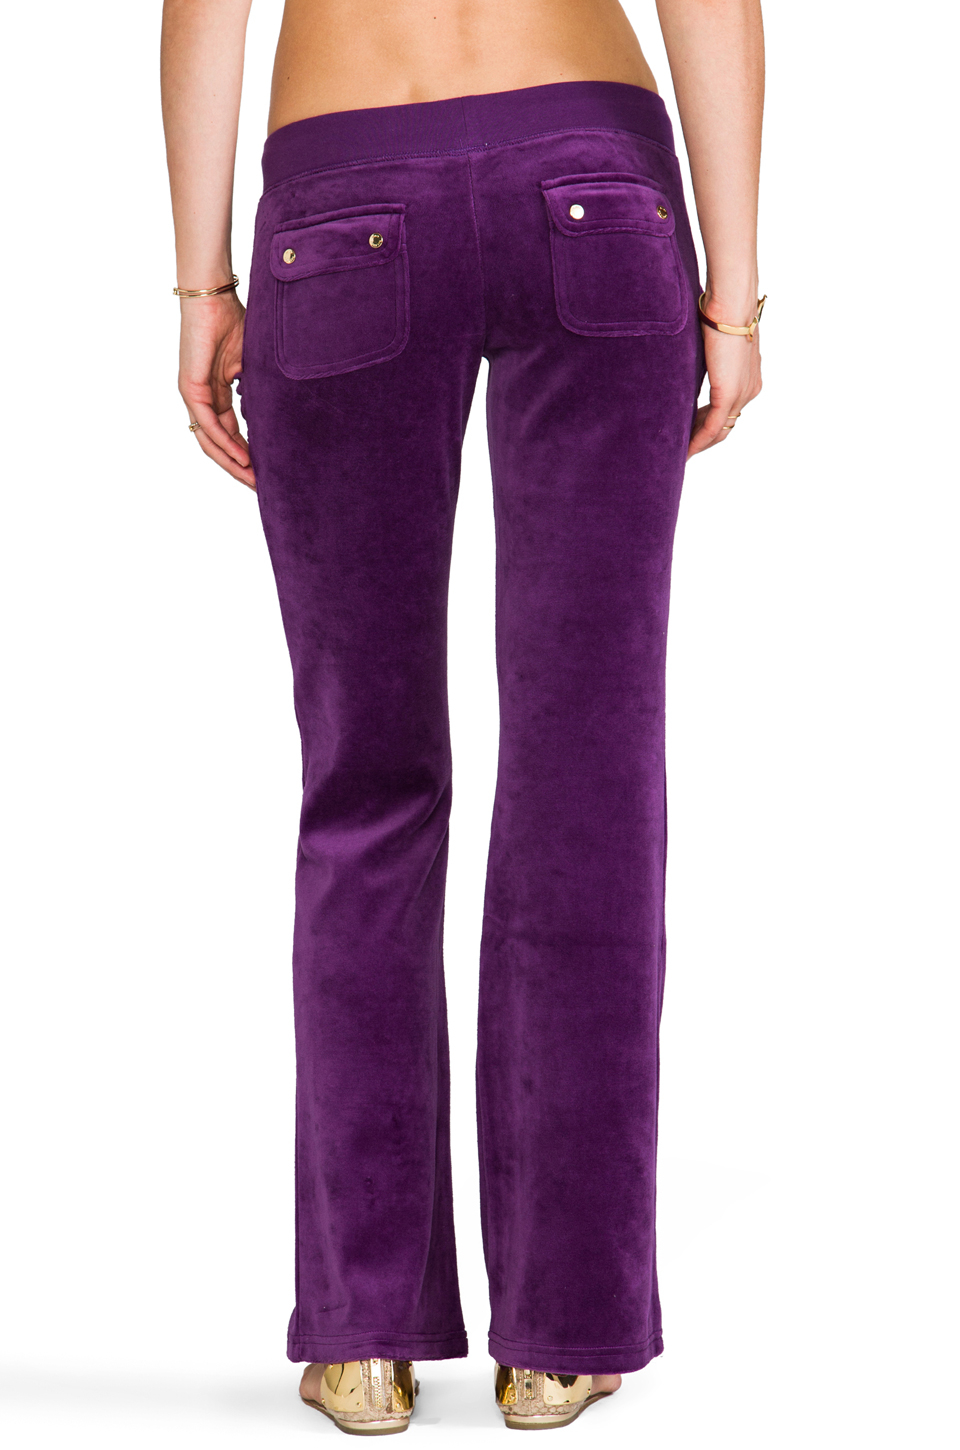 Lyst - Juicy Couture J Bling Bootcut Pant in Purple in Purple